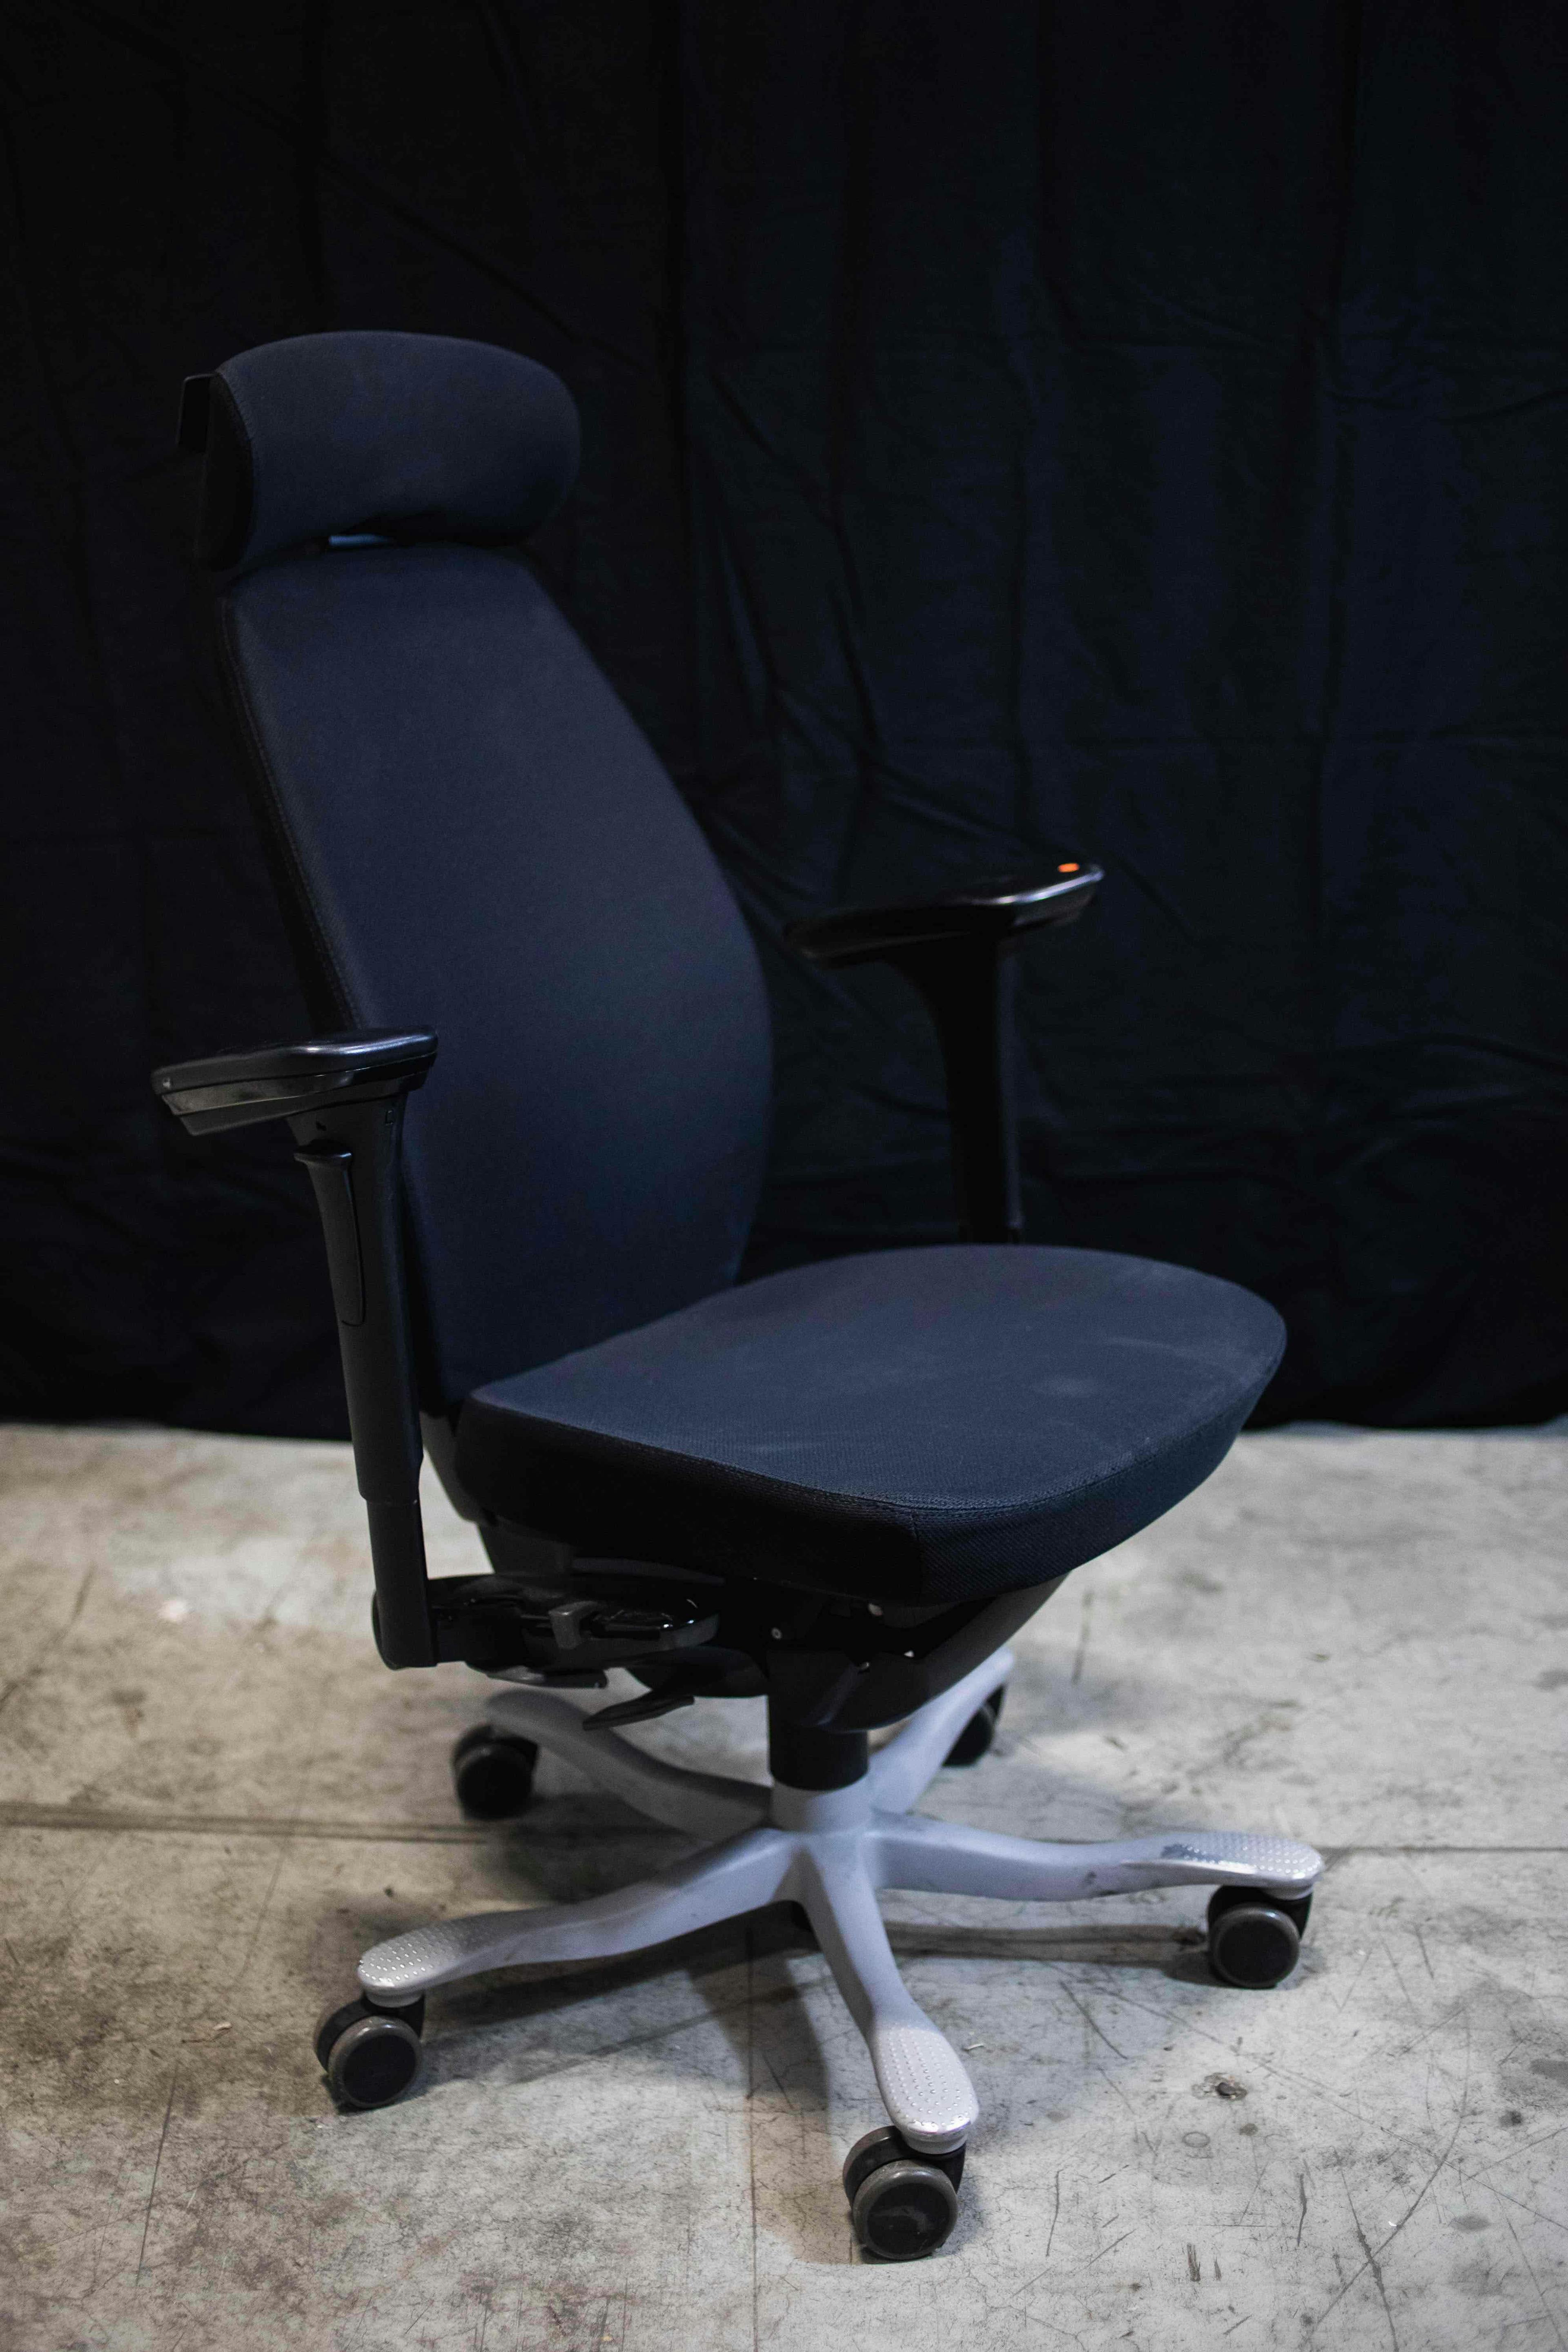 Black office chairs with headrest